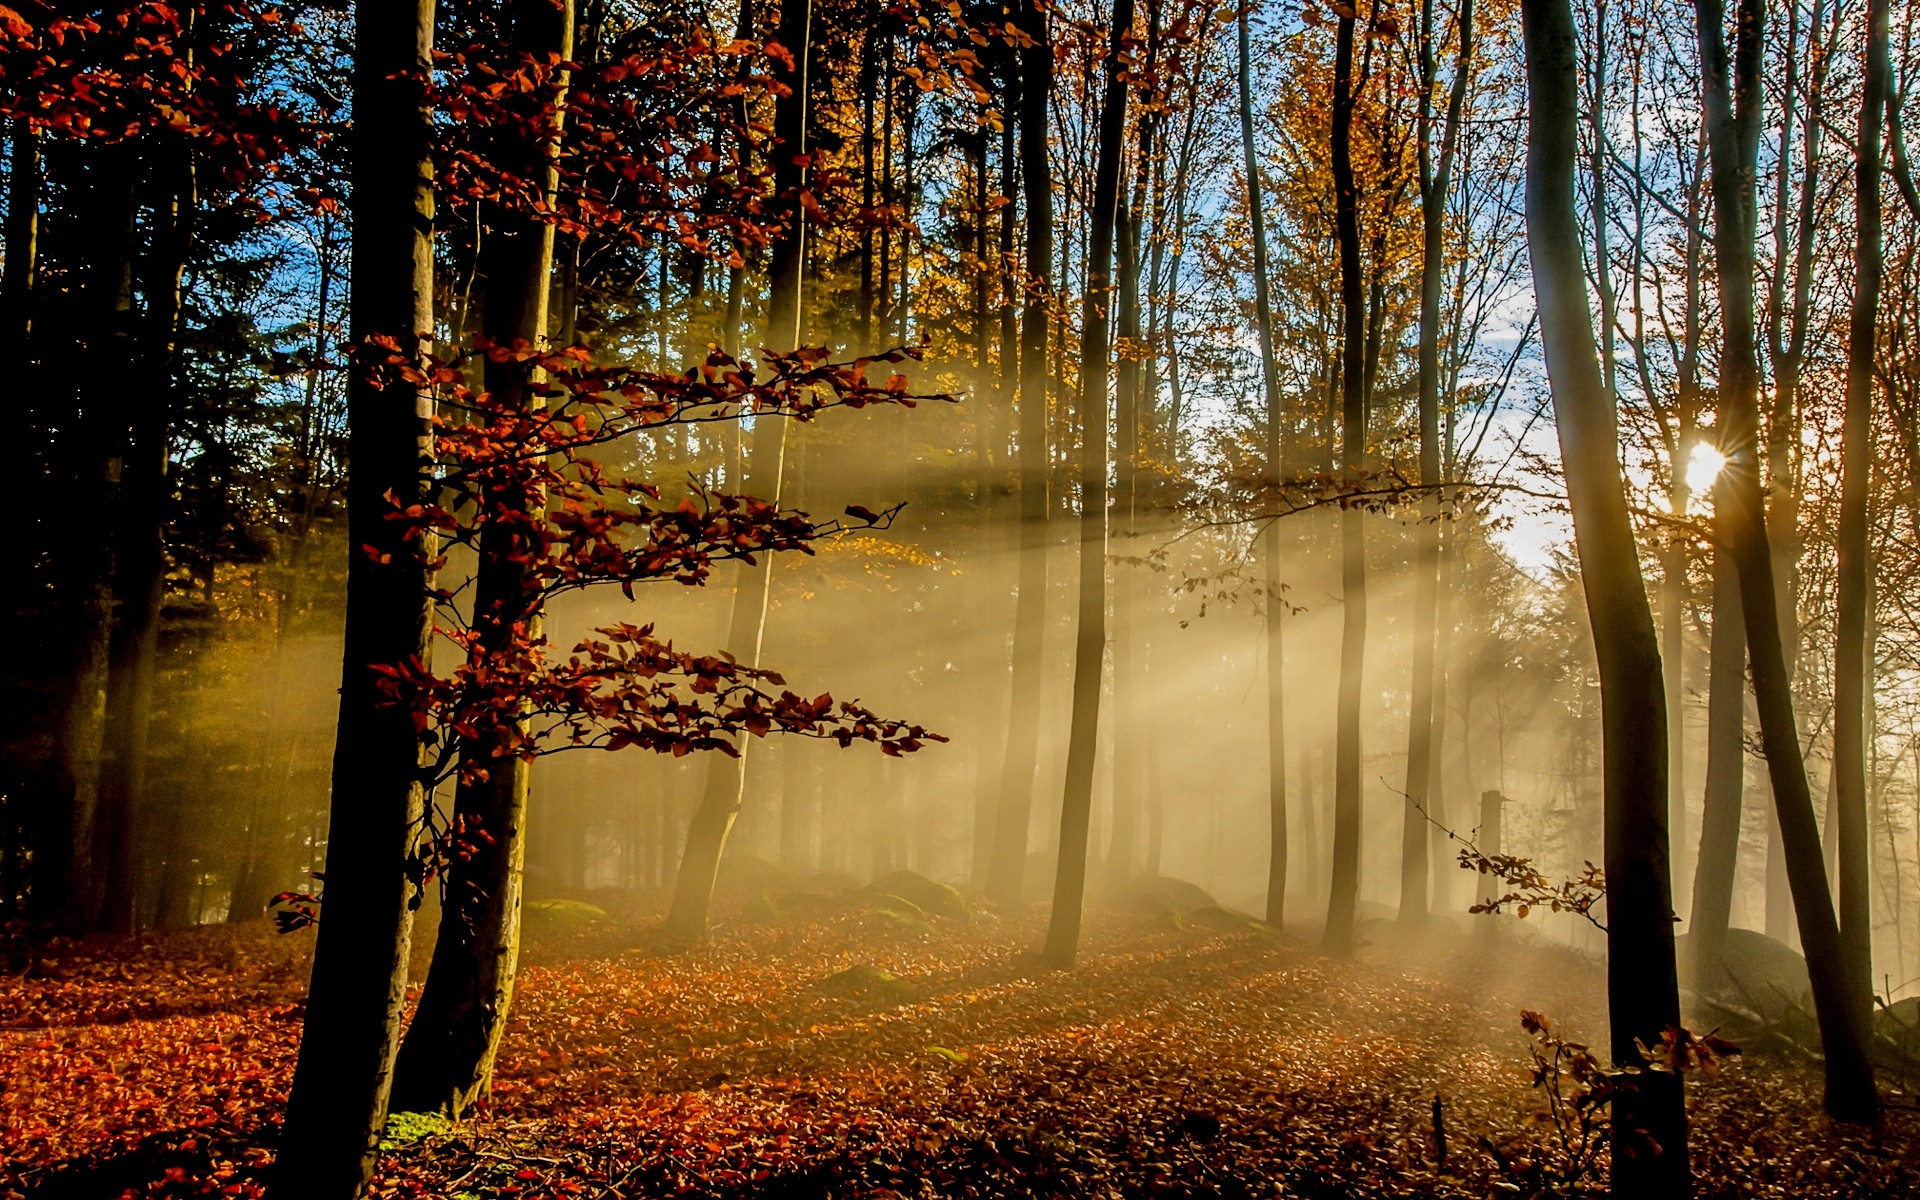 Sunlight breaks through the trees in a fall forest